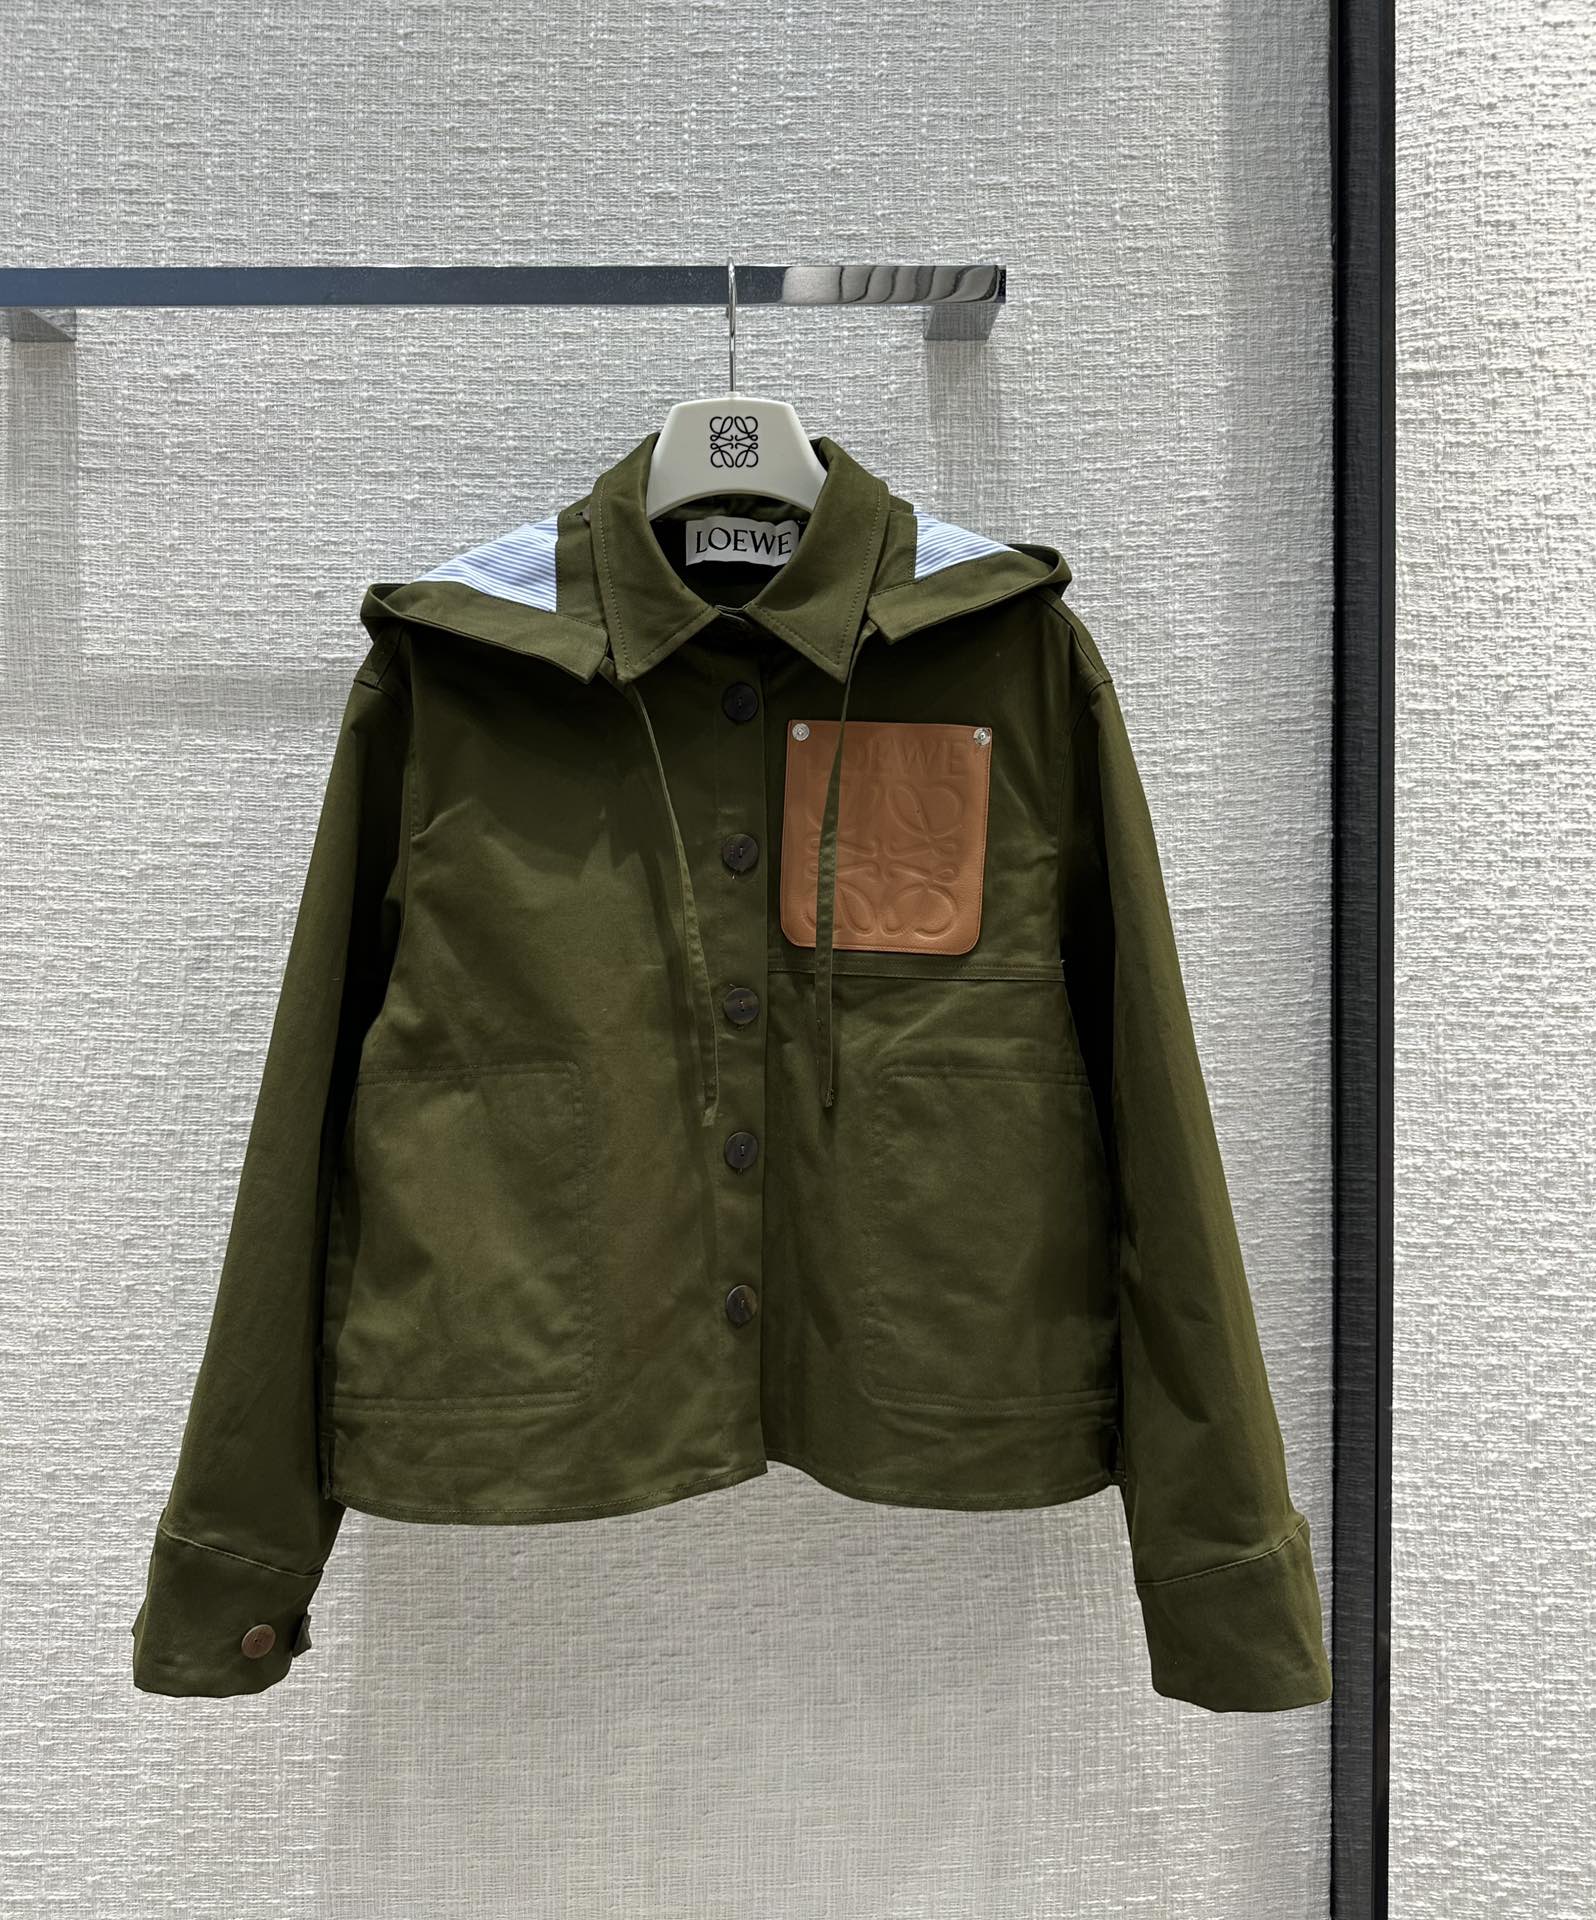 Loewe Clothing Coats & Jackets Green Fall Collection Hooded Top